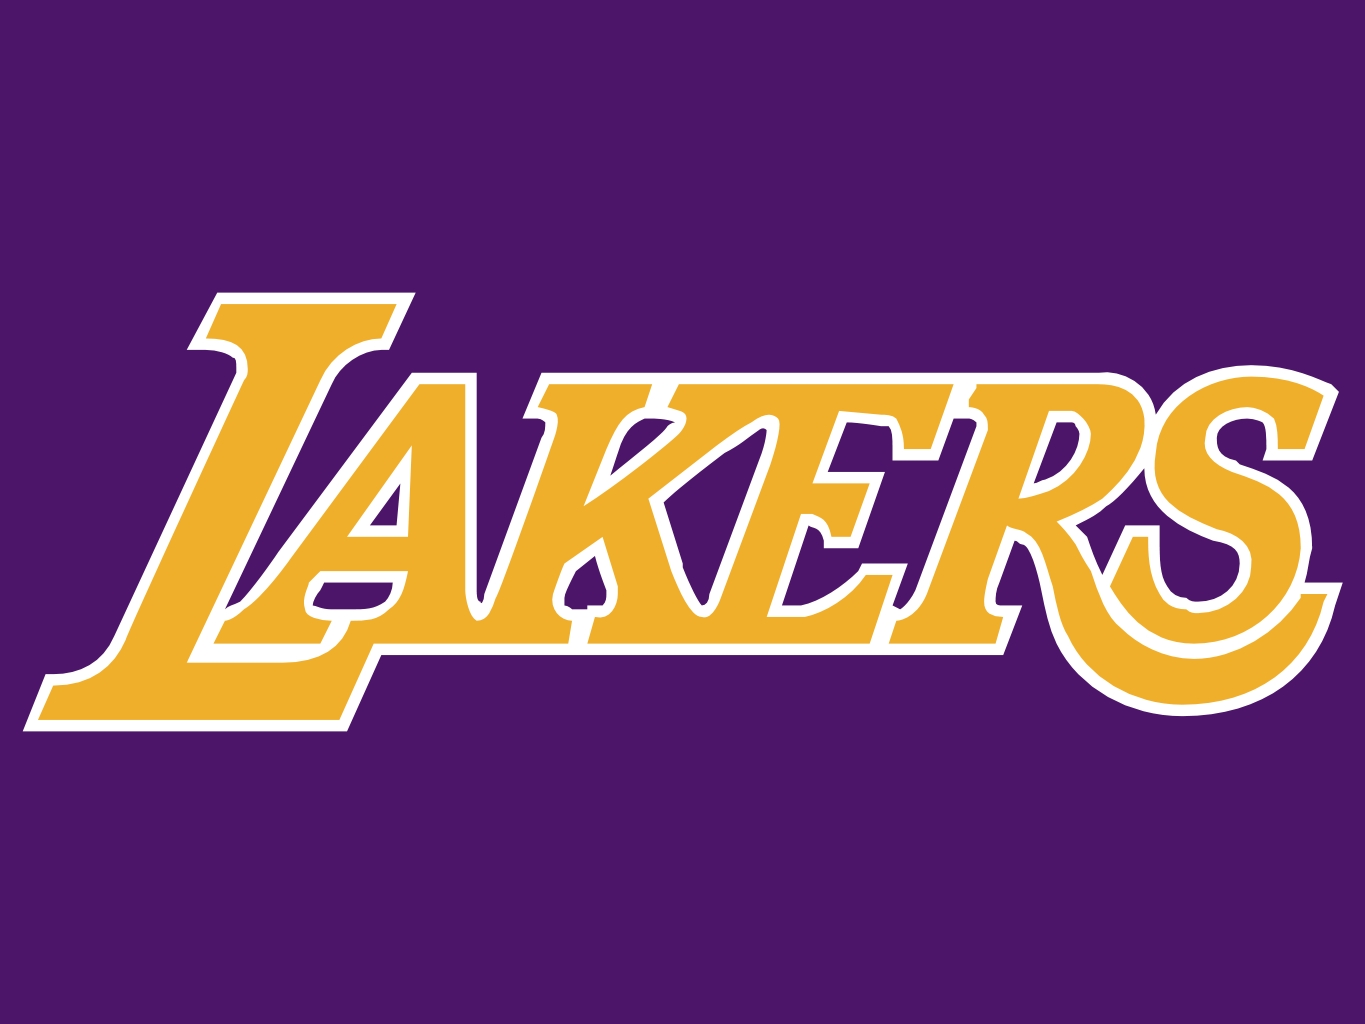 Lakers Wallpapers